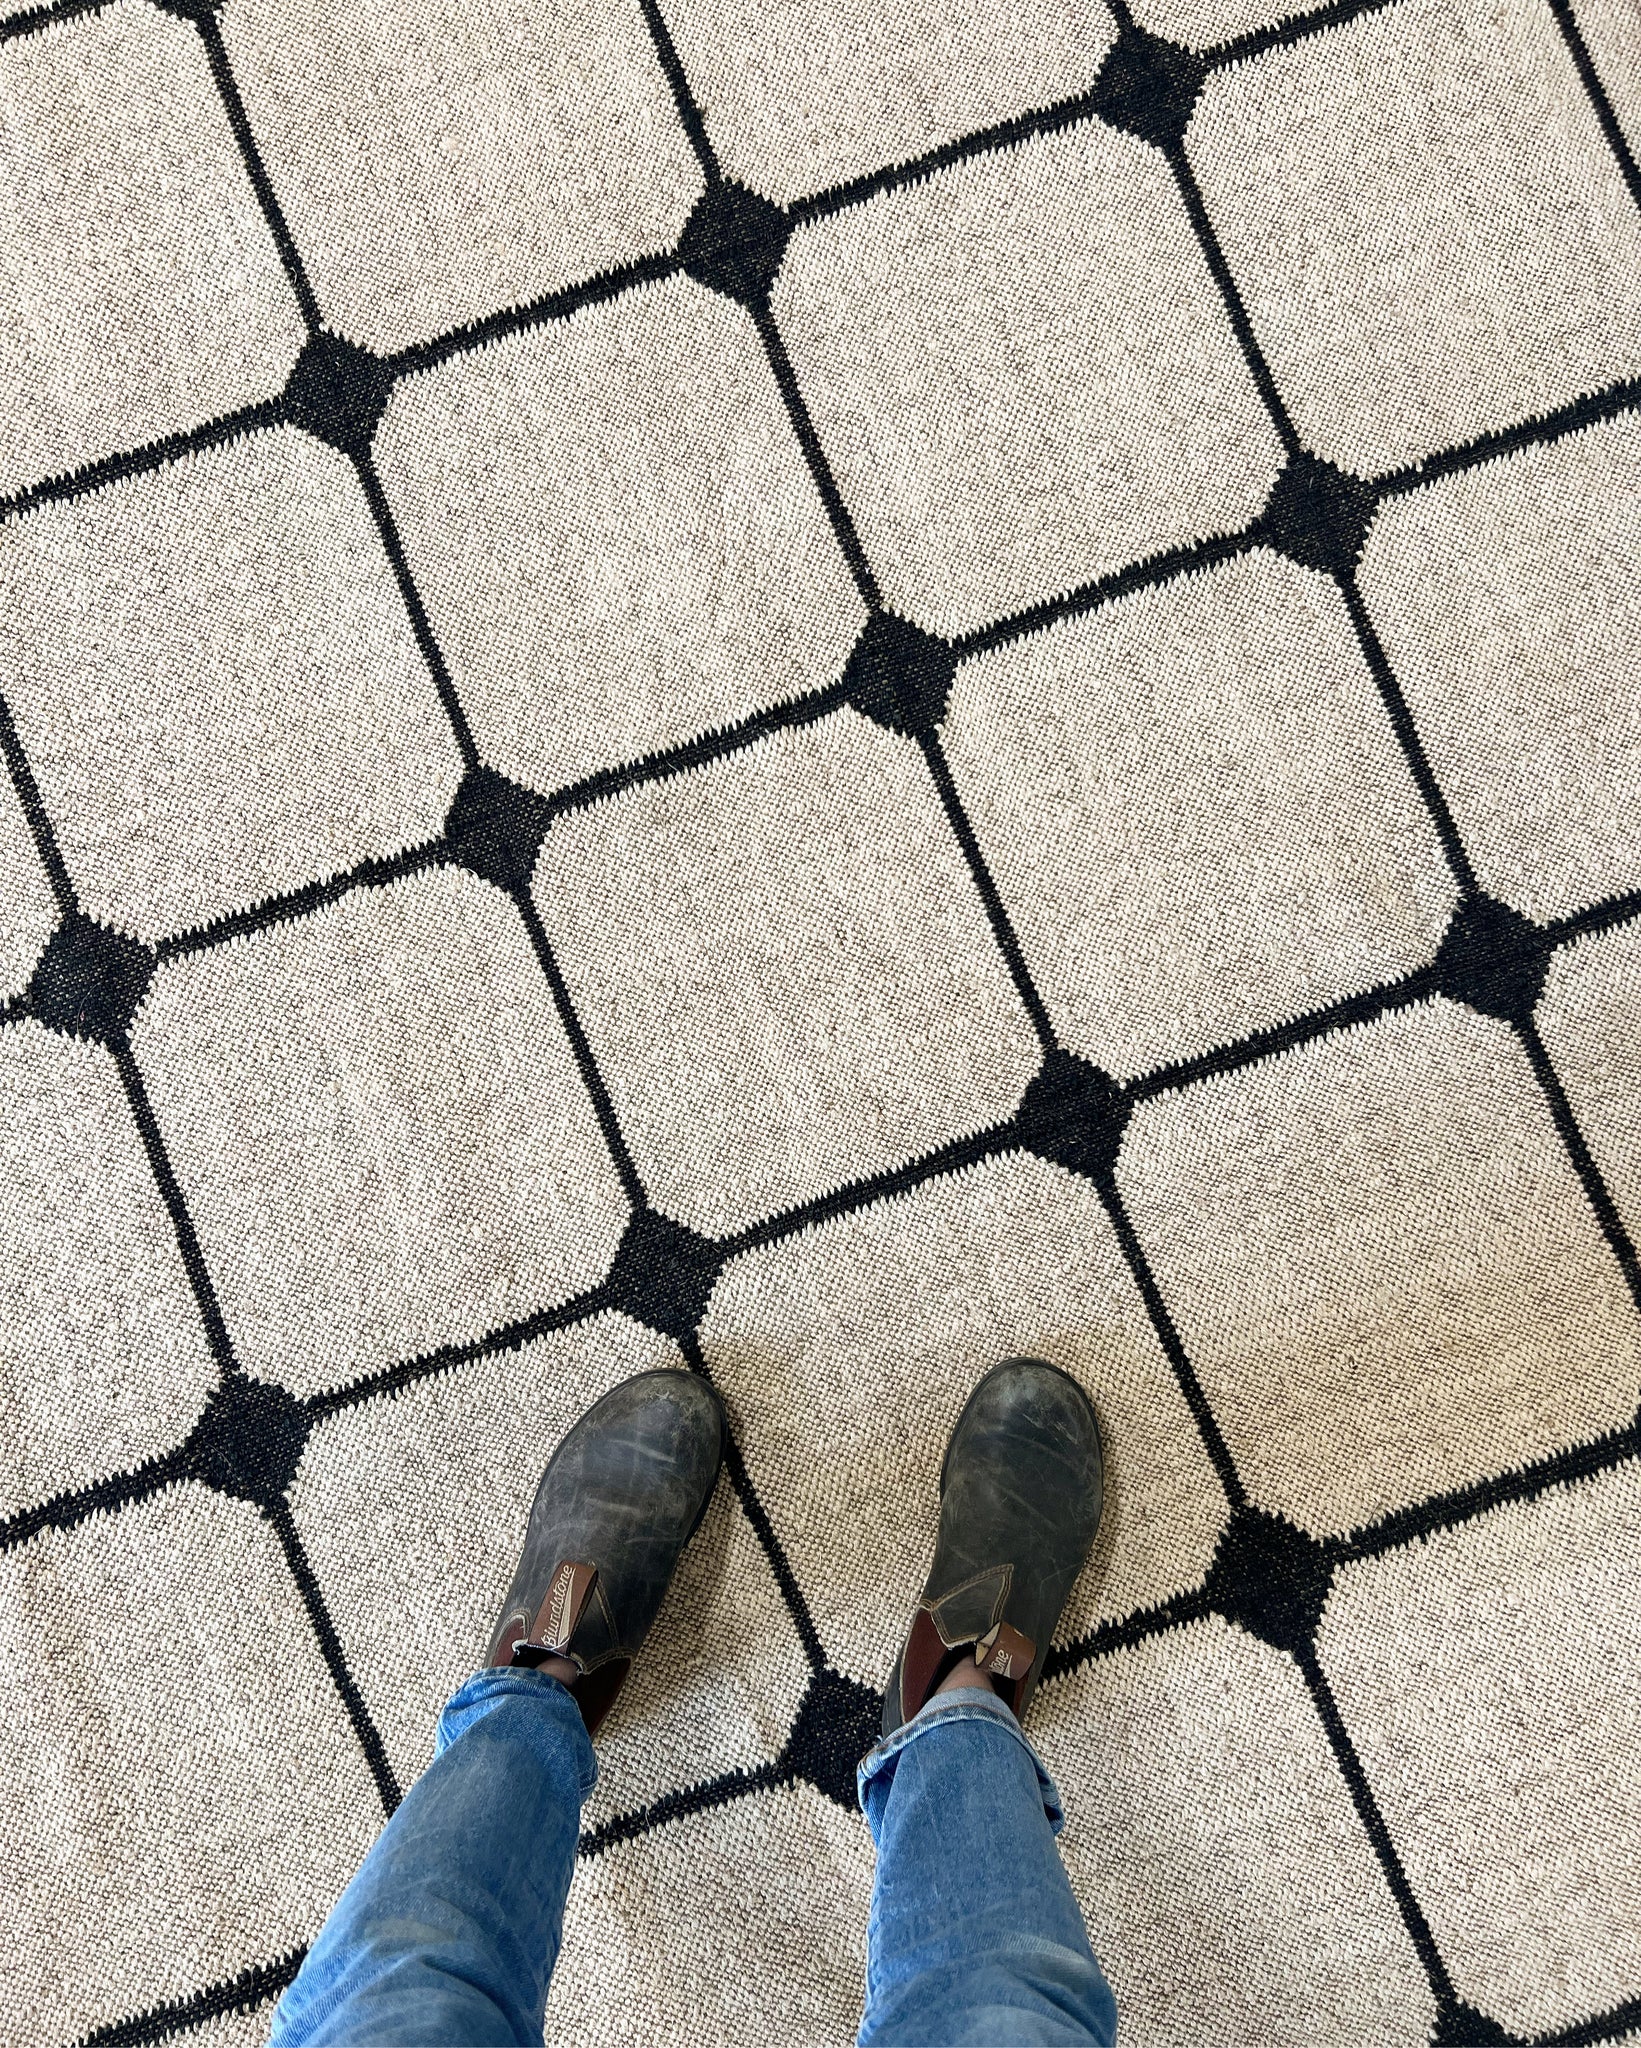 The Forsyth Checkerboard Rug - Tile Checks in Off Black